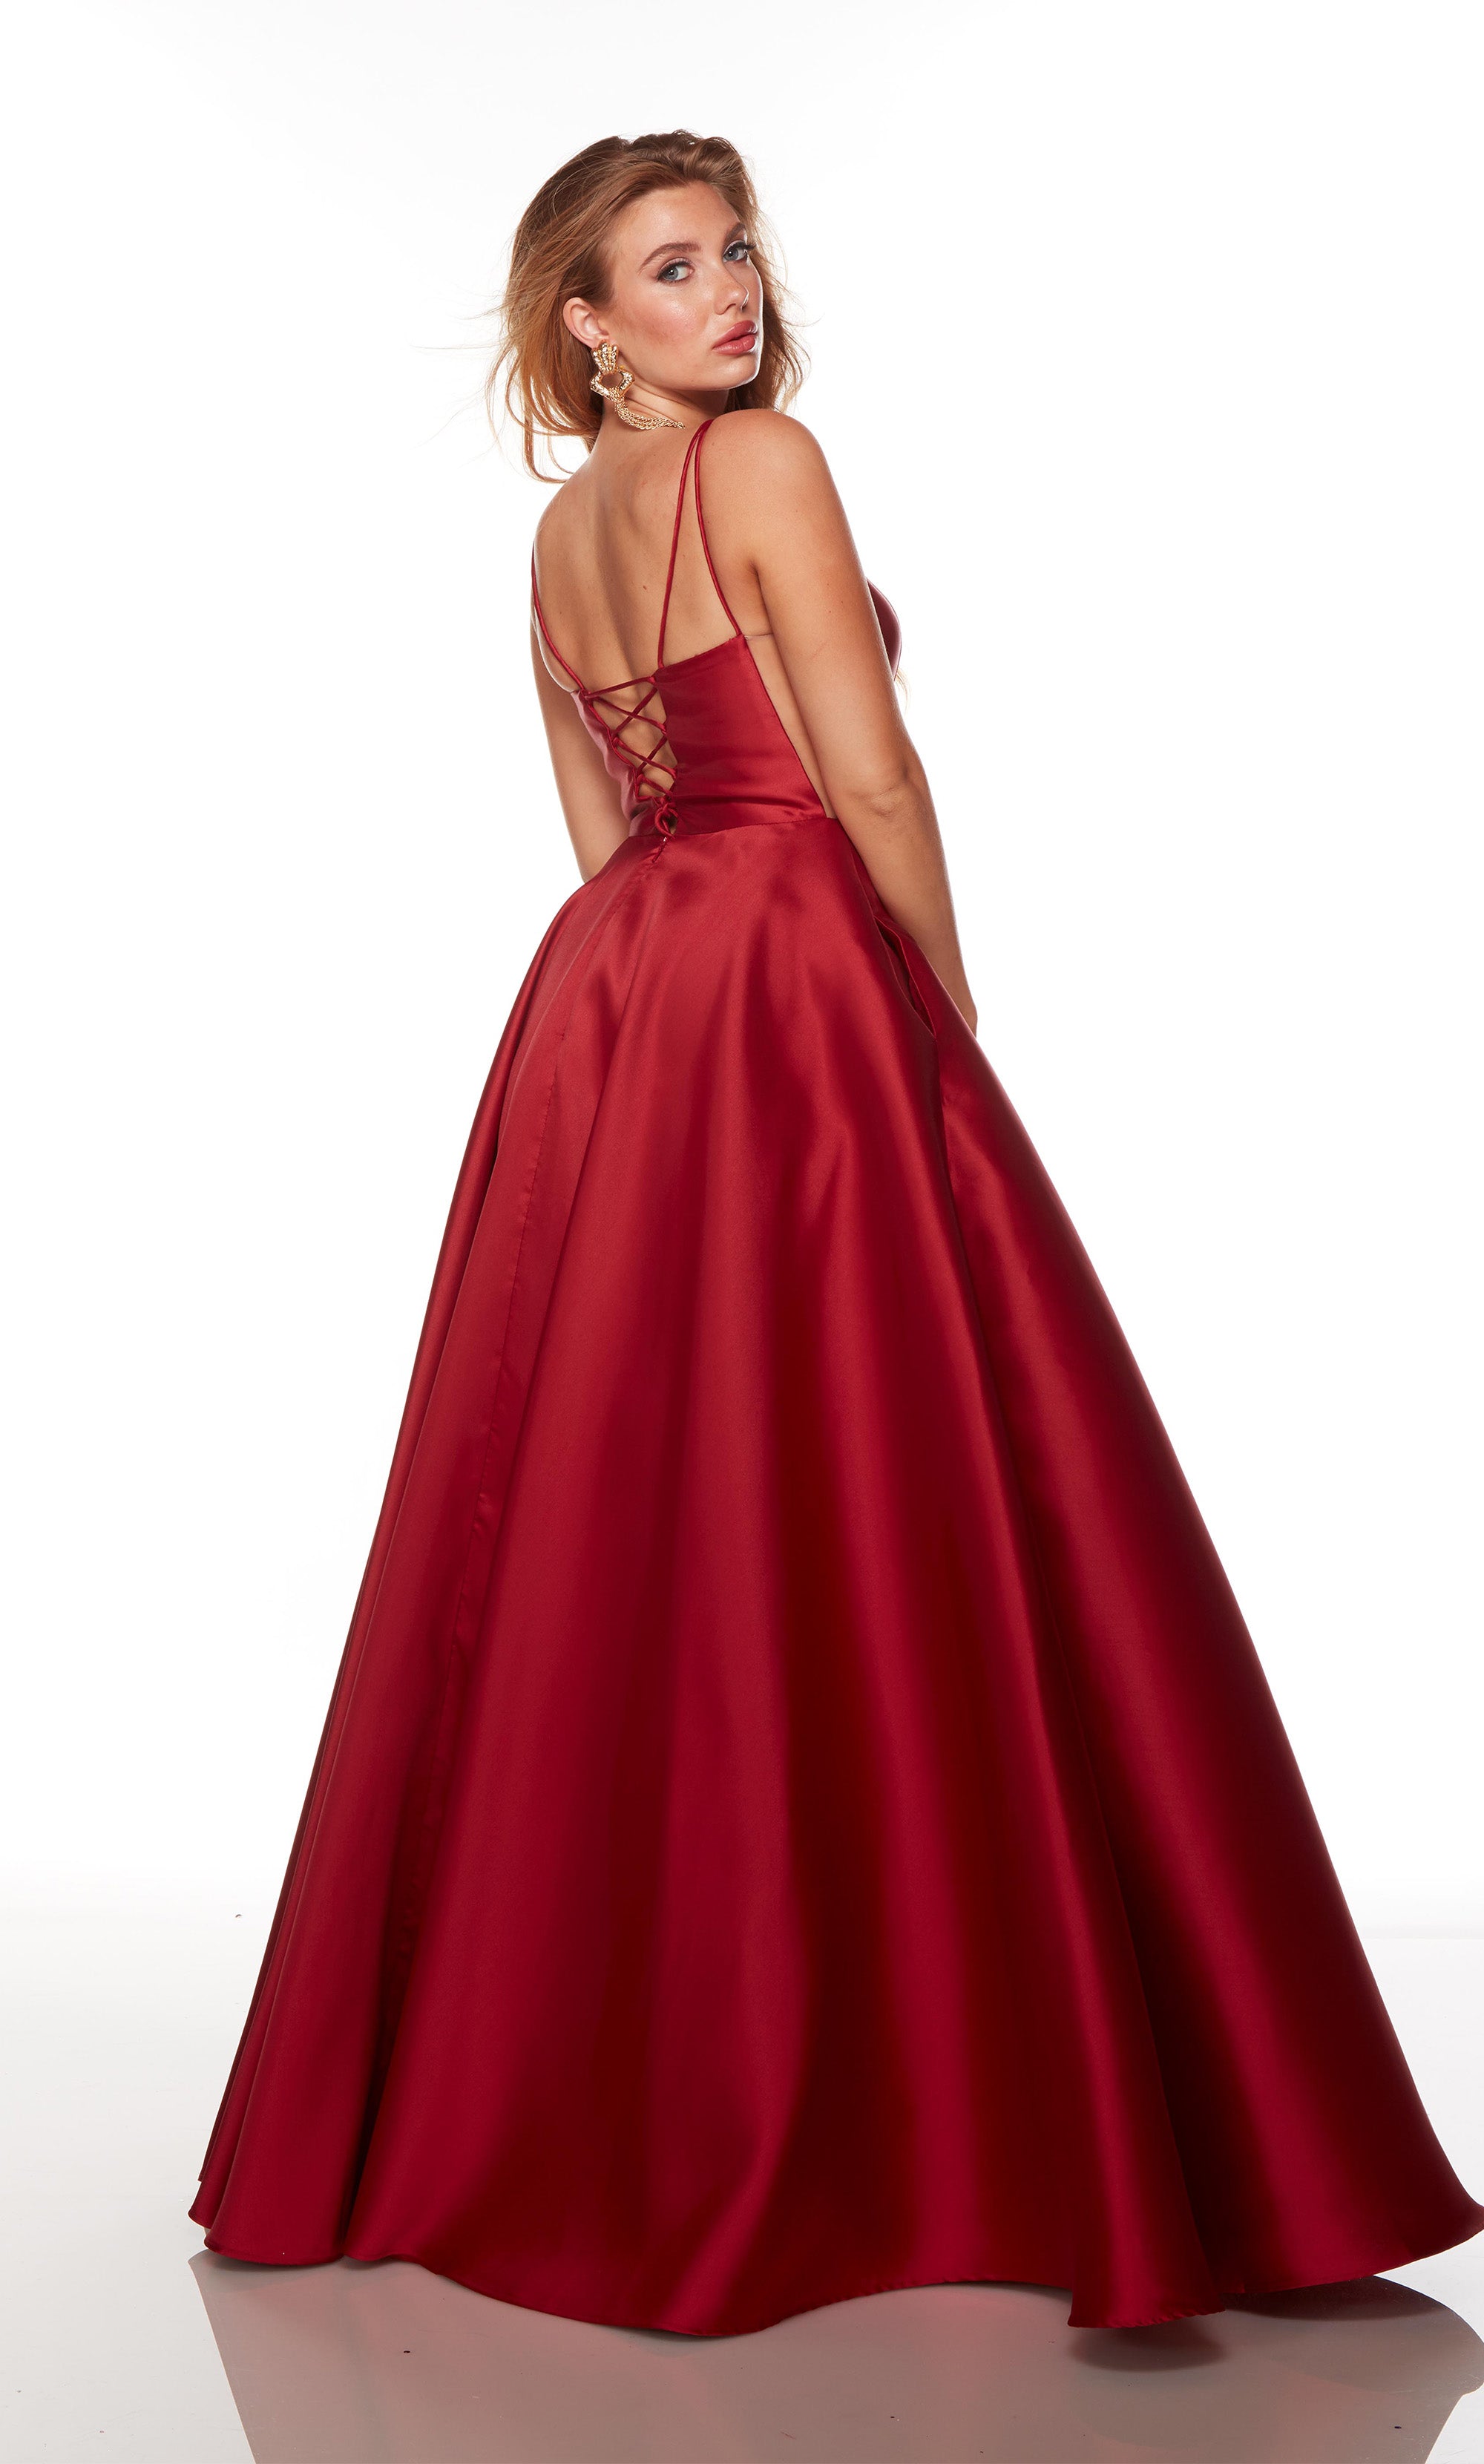 Wine Red Evening Dresses Long With Sleeves Princess Dresses Evening Wear  Online_Prom Dresses_Special Occasion Dresses_Wedding Dresses, Prom Dresses,  Evening Dresses | Babyonlinedress.de